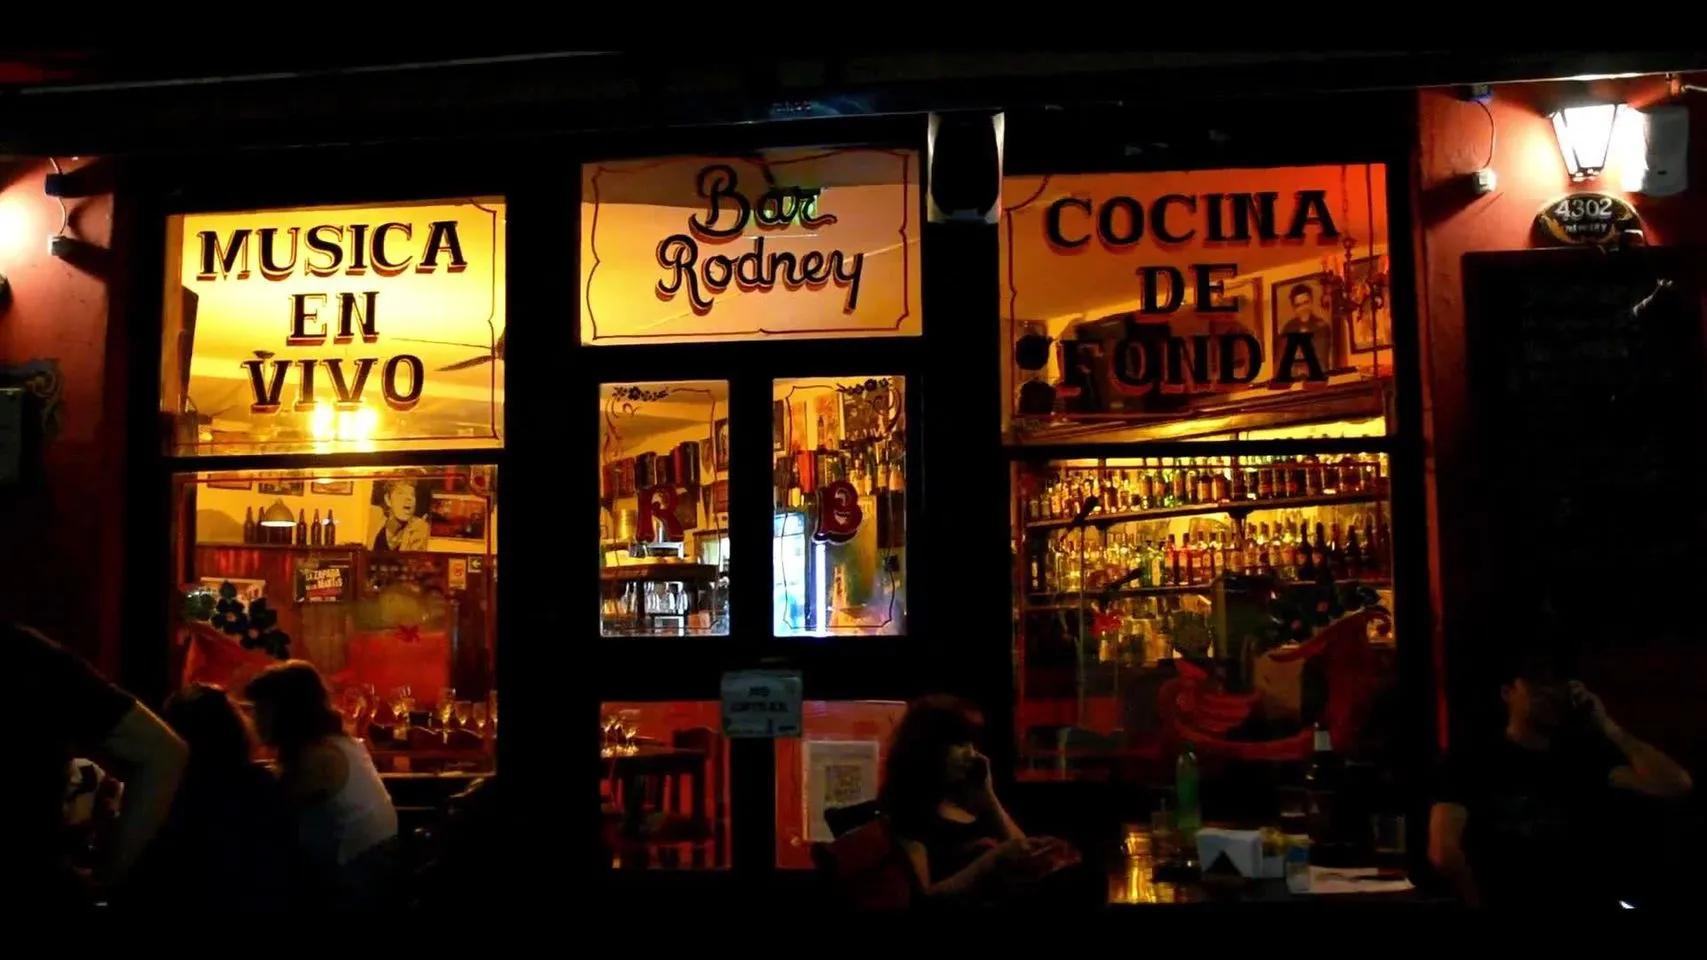 Bar de Rodney in Argentina, South America | Bars - Rated 4.2